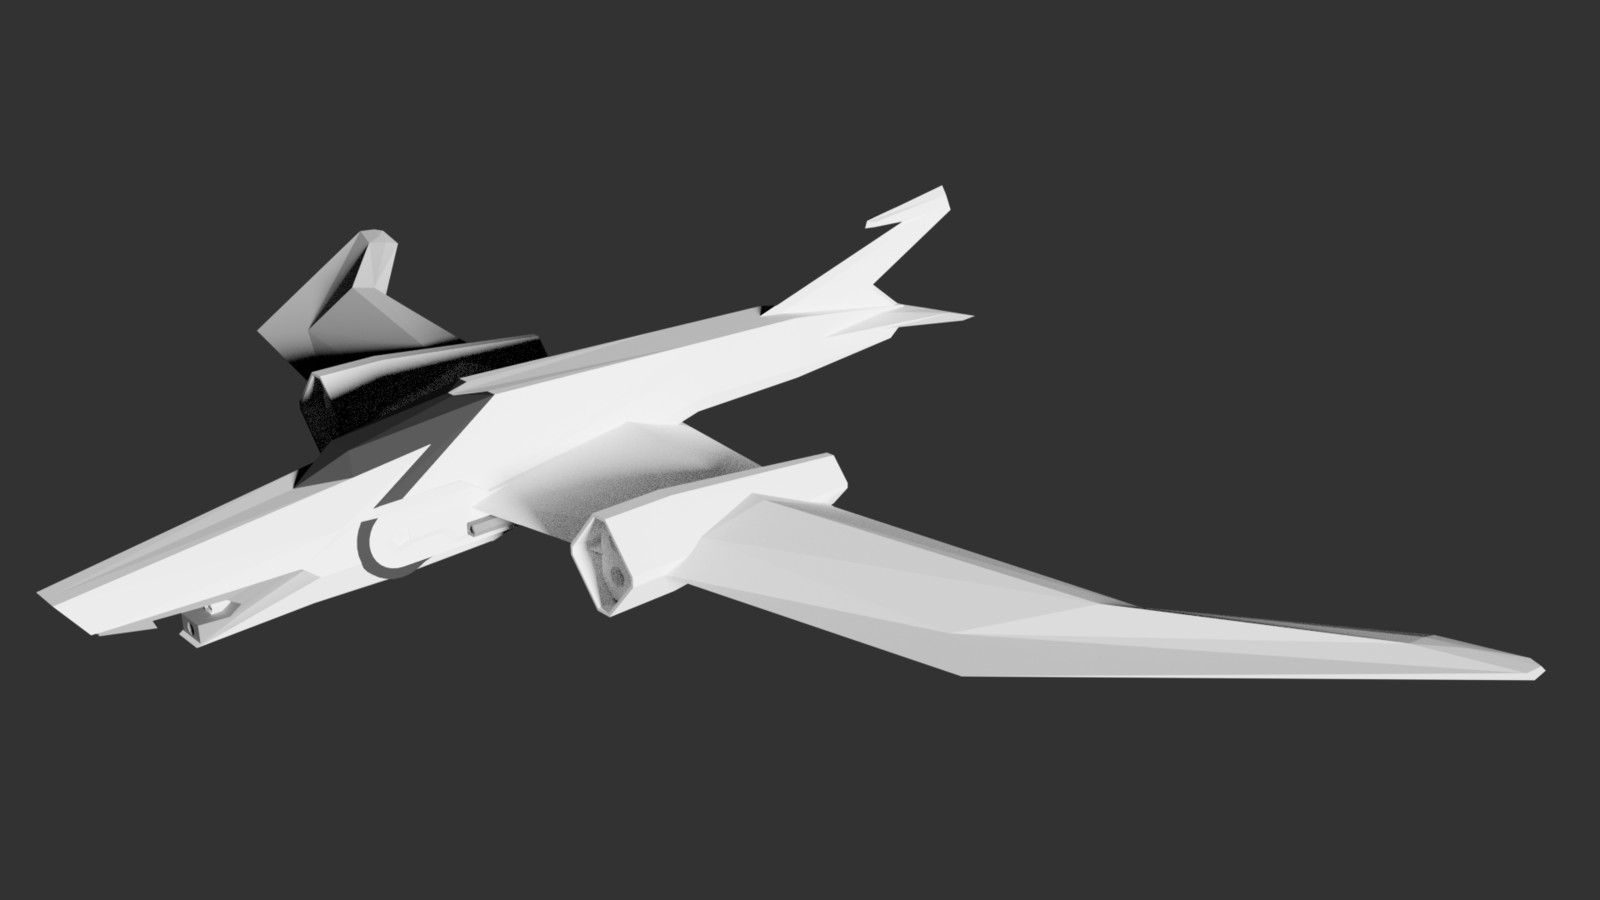 A reference model I made to better grasp the perspective and form of the fighter. Much of my weapon and vehicle concept designs tend to begin with a rough 3D model.